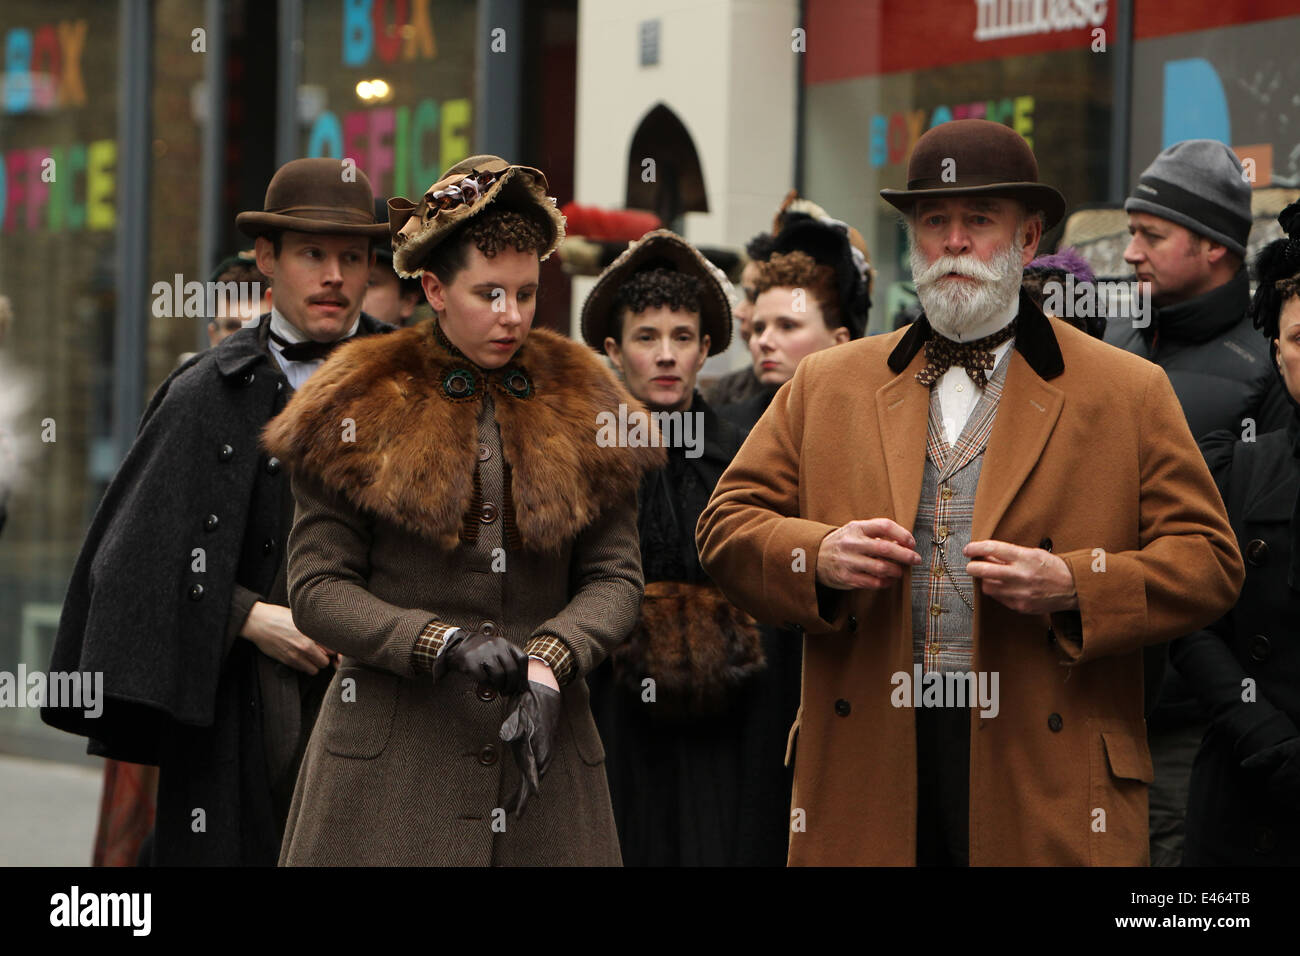 Actors in period costume from the on street set of Victorian horror tv series 'Penny Dreadful'. Stock Photo